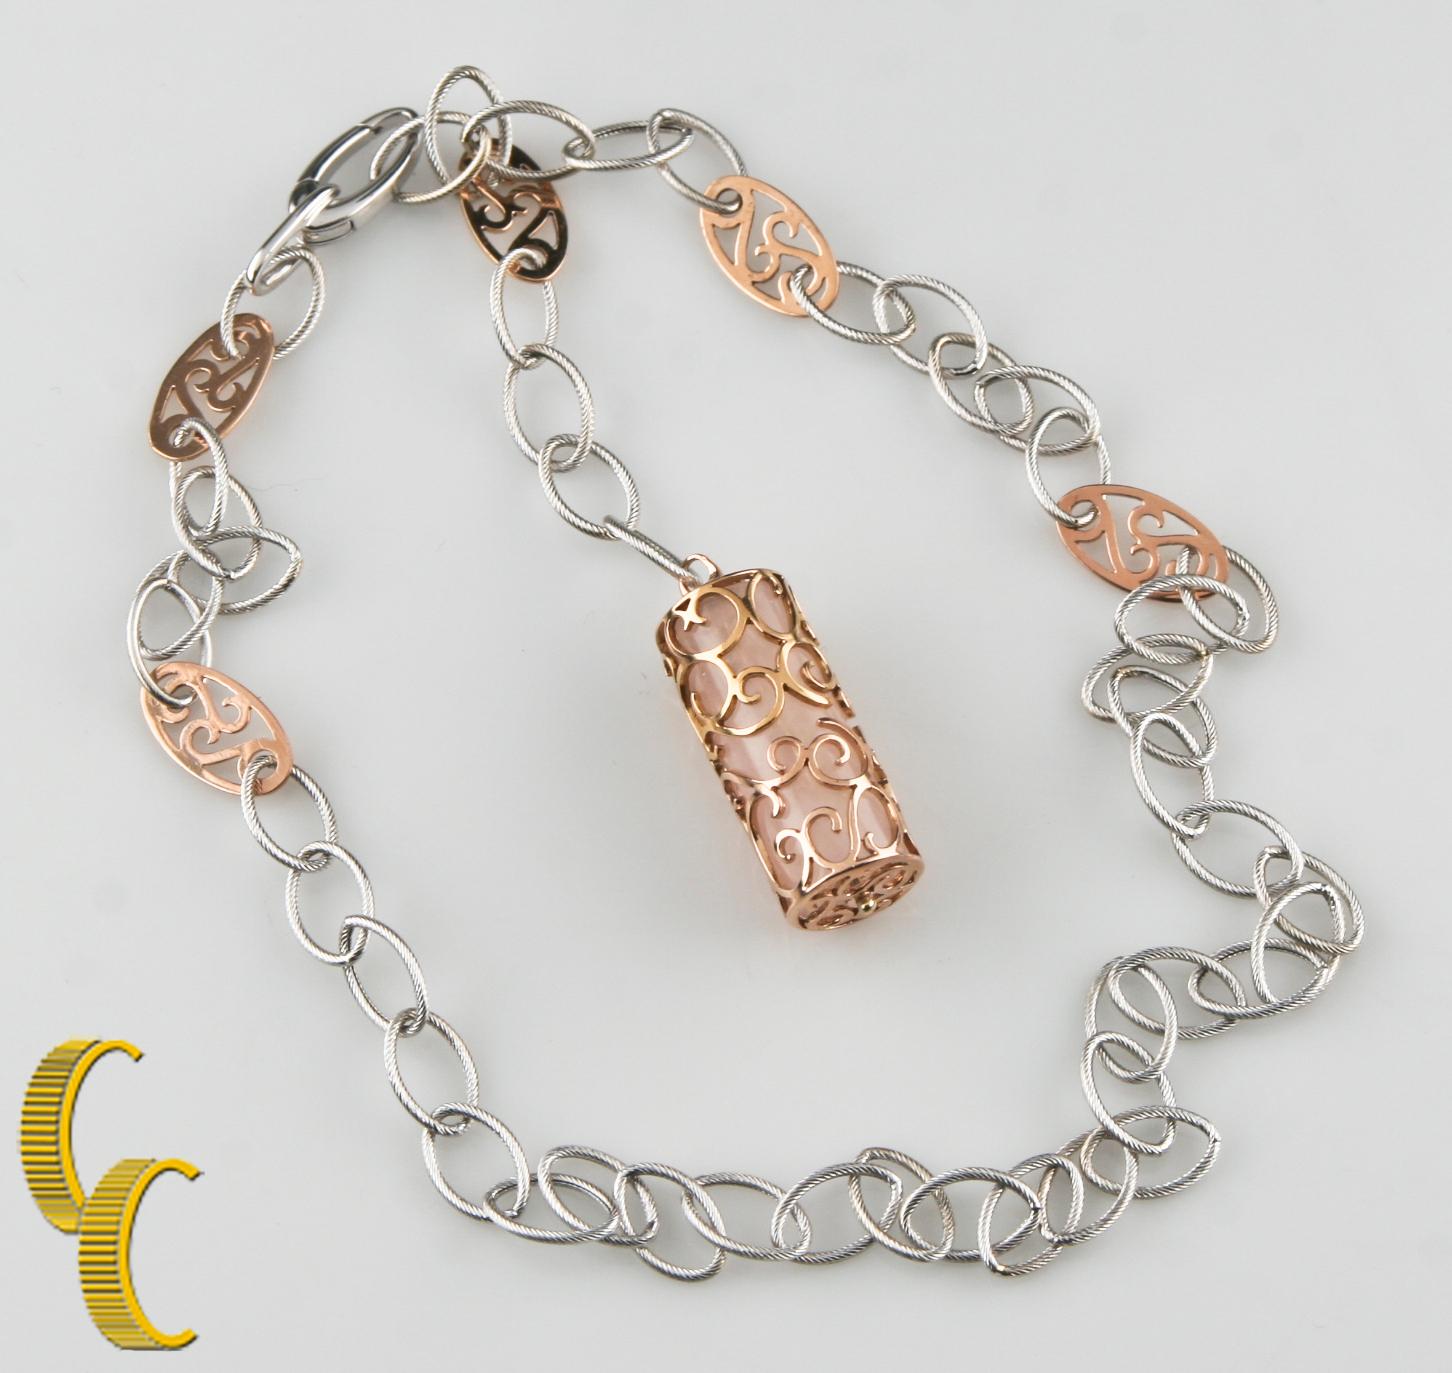 Tumbled Unique Necklace Featuring Coral Pendant in Cage Set in 14k White and Rose Gold For Sale